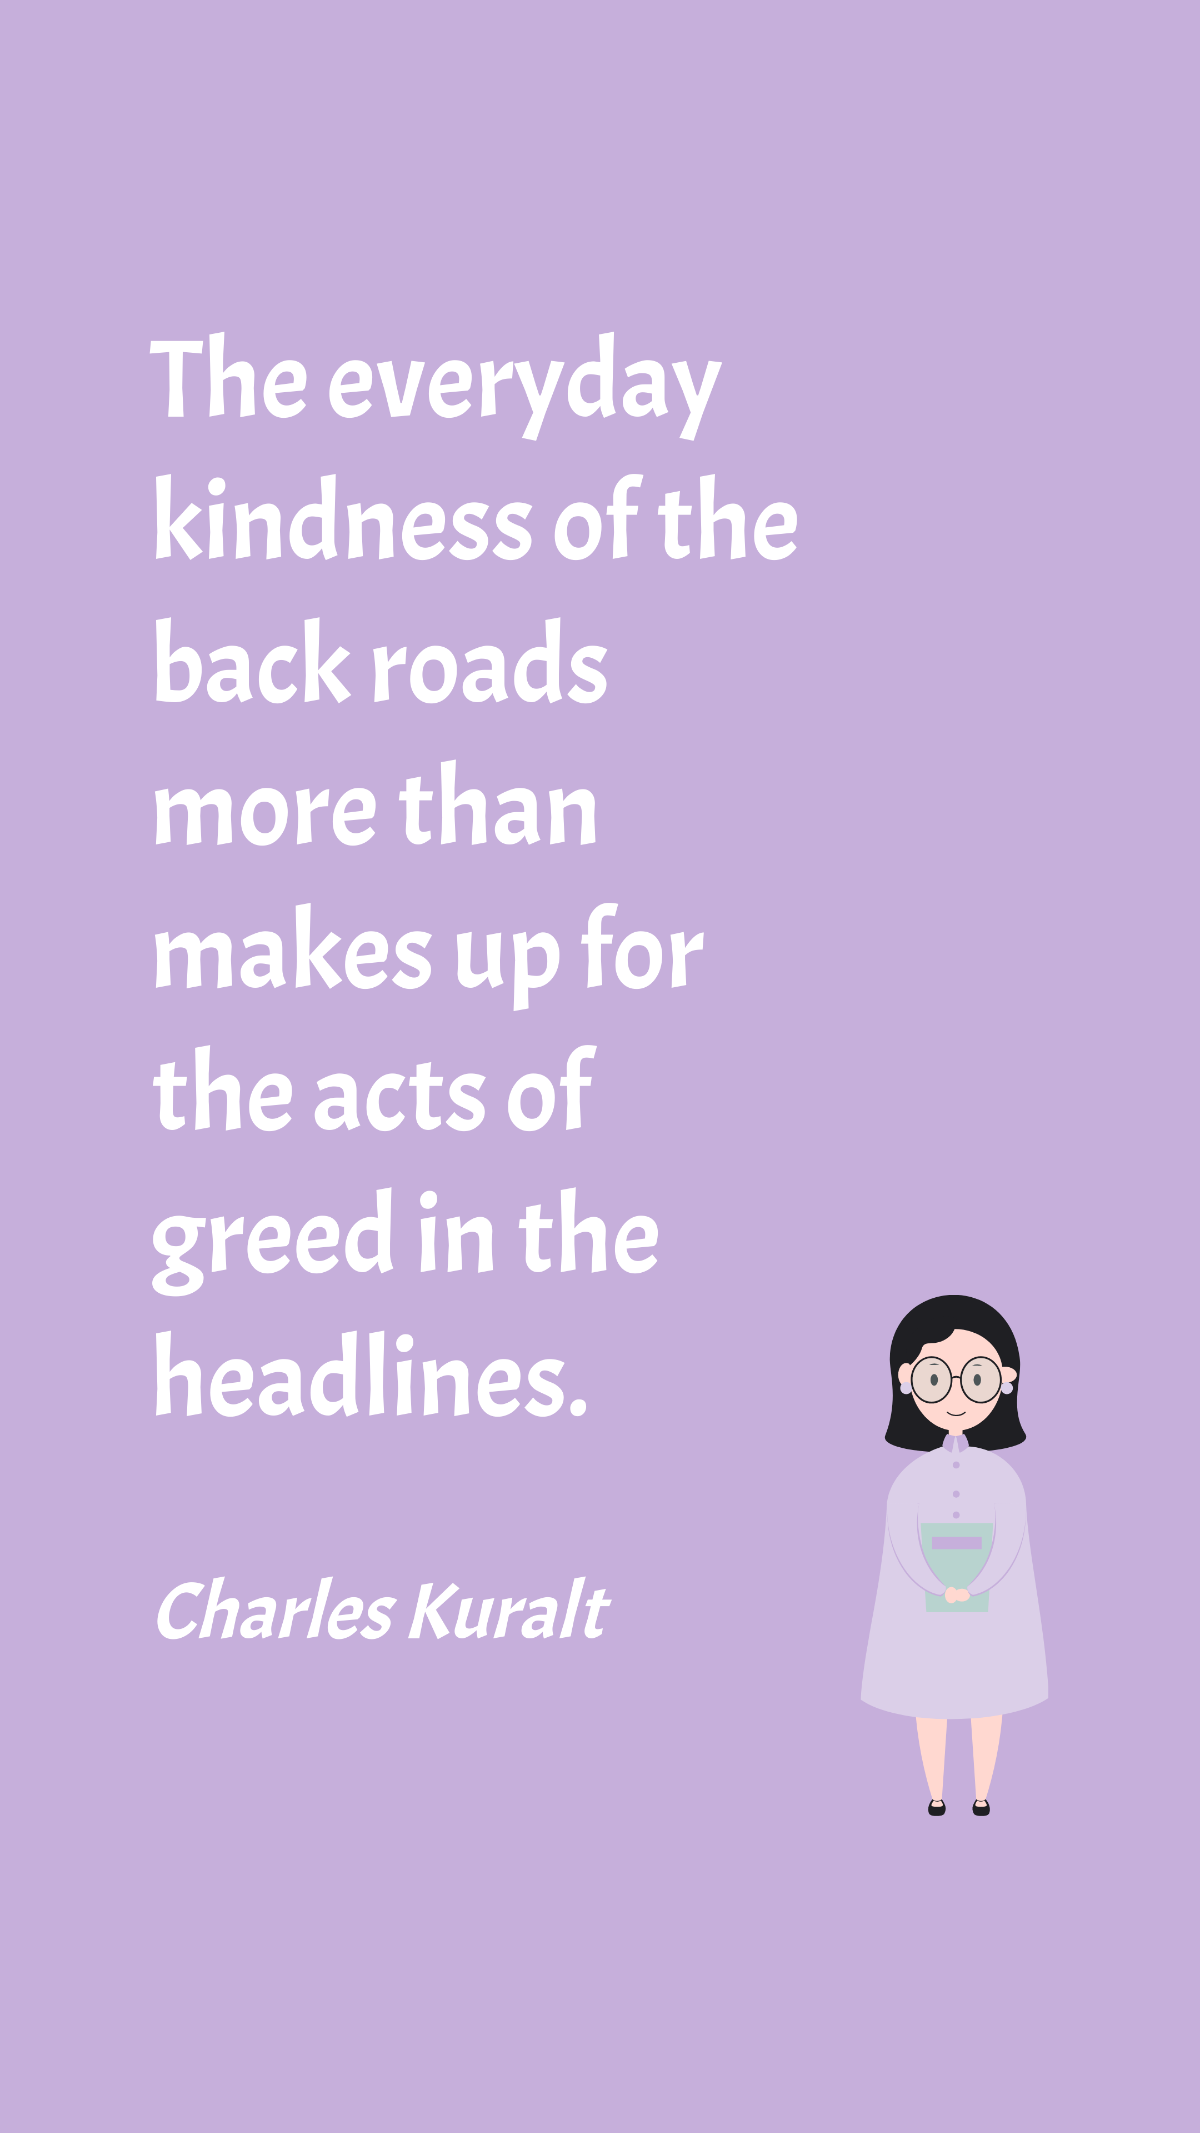 Charles Kuralt - The everyday kindness of the back roads more than makes up for the acts of greed in the headlines. Template